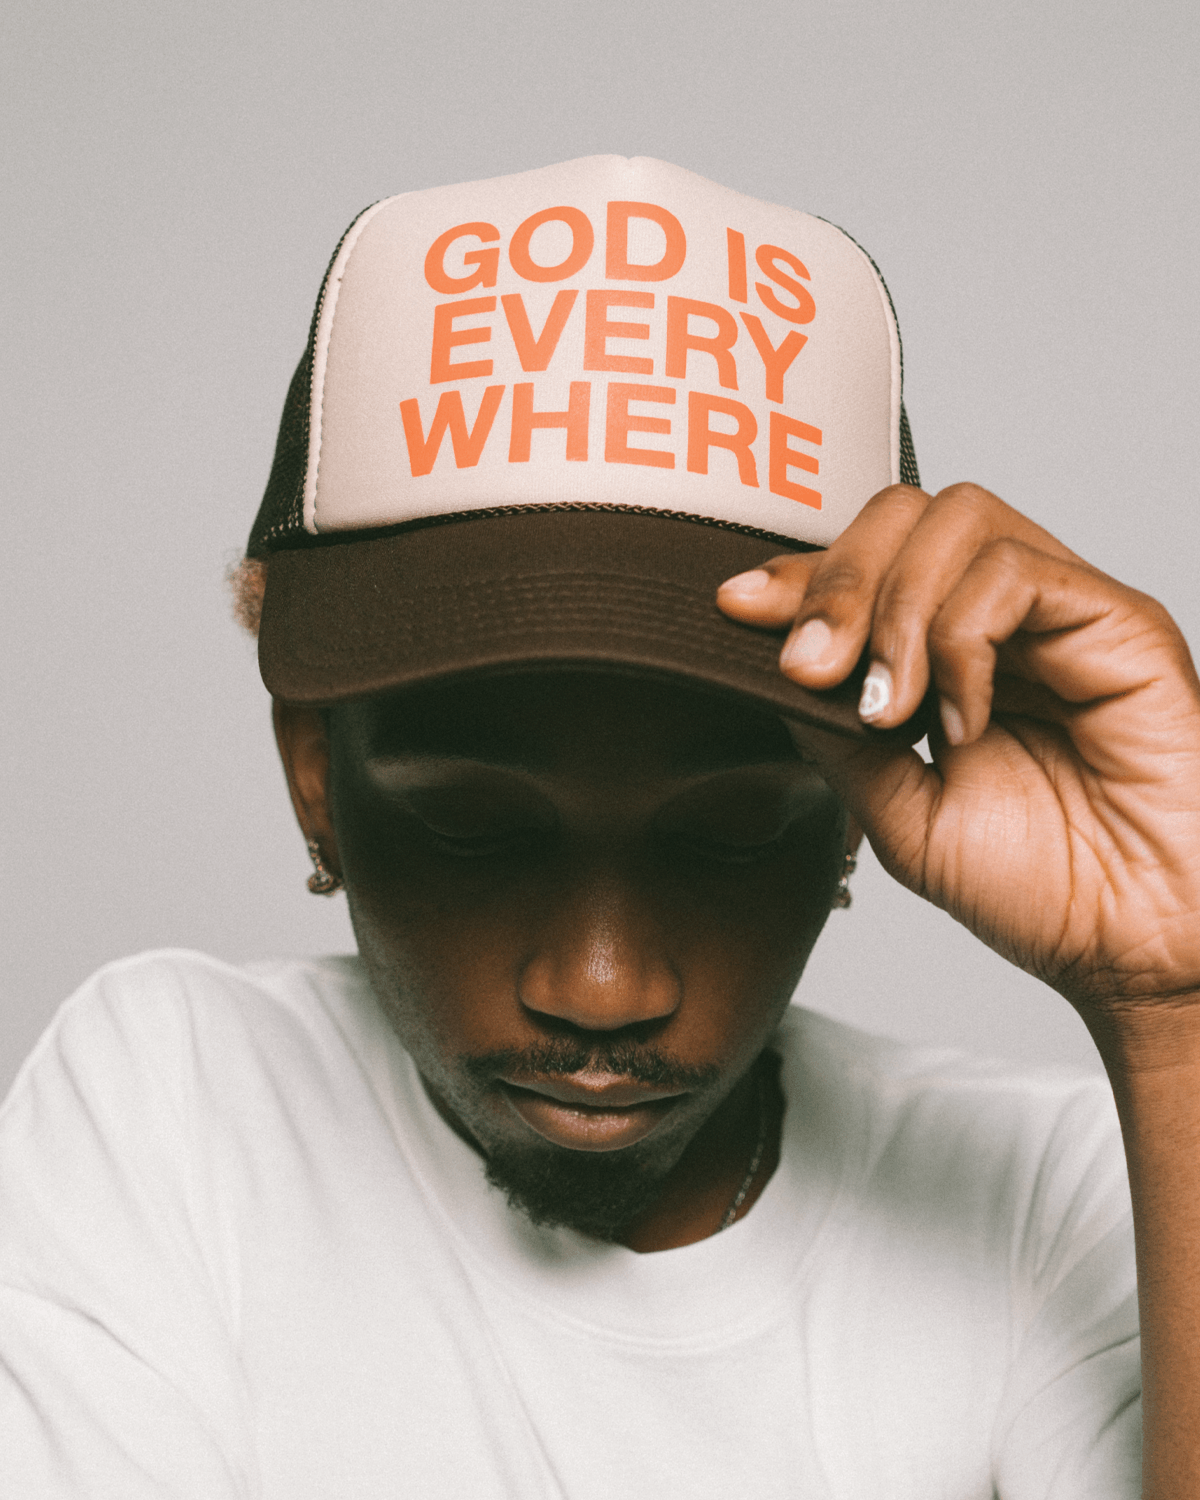 GOD IS EVERYWHERE Trucker hat brown and tan with orange writing. Christian hat by NHIM APPAREL